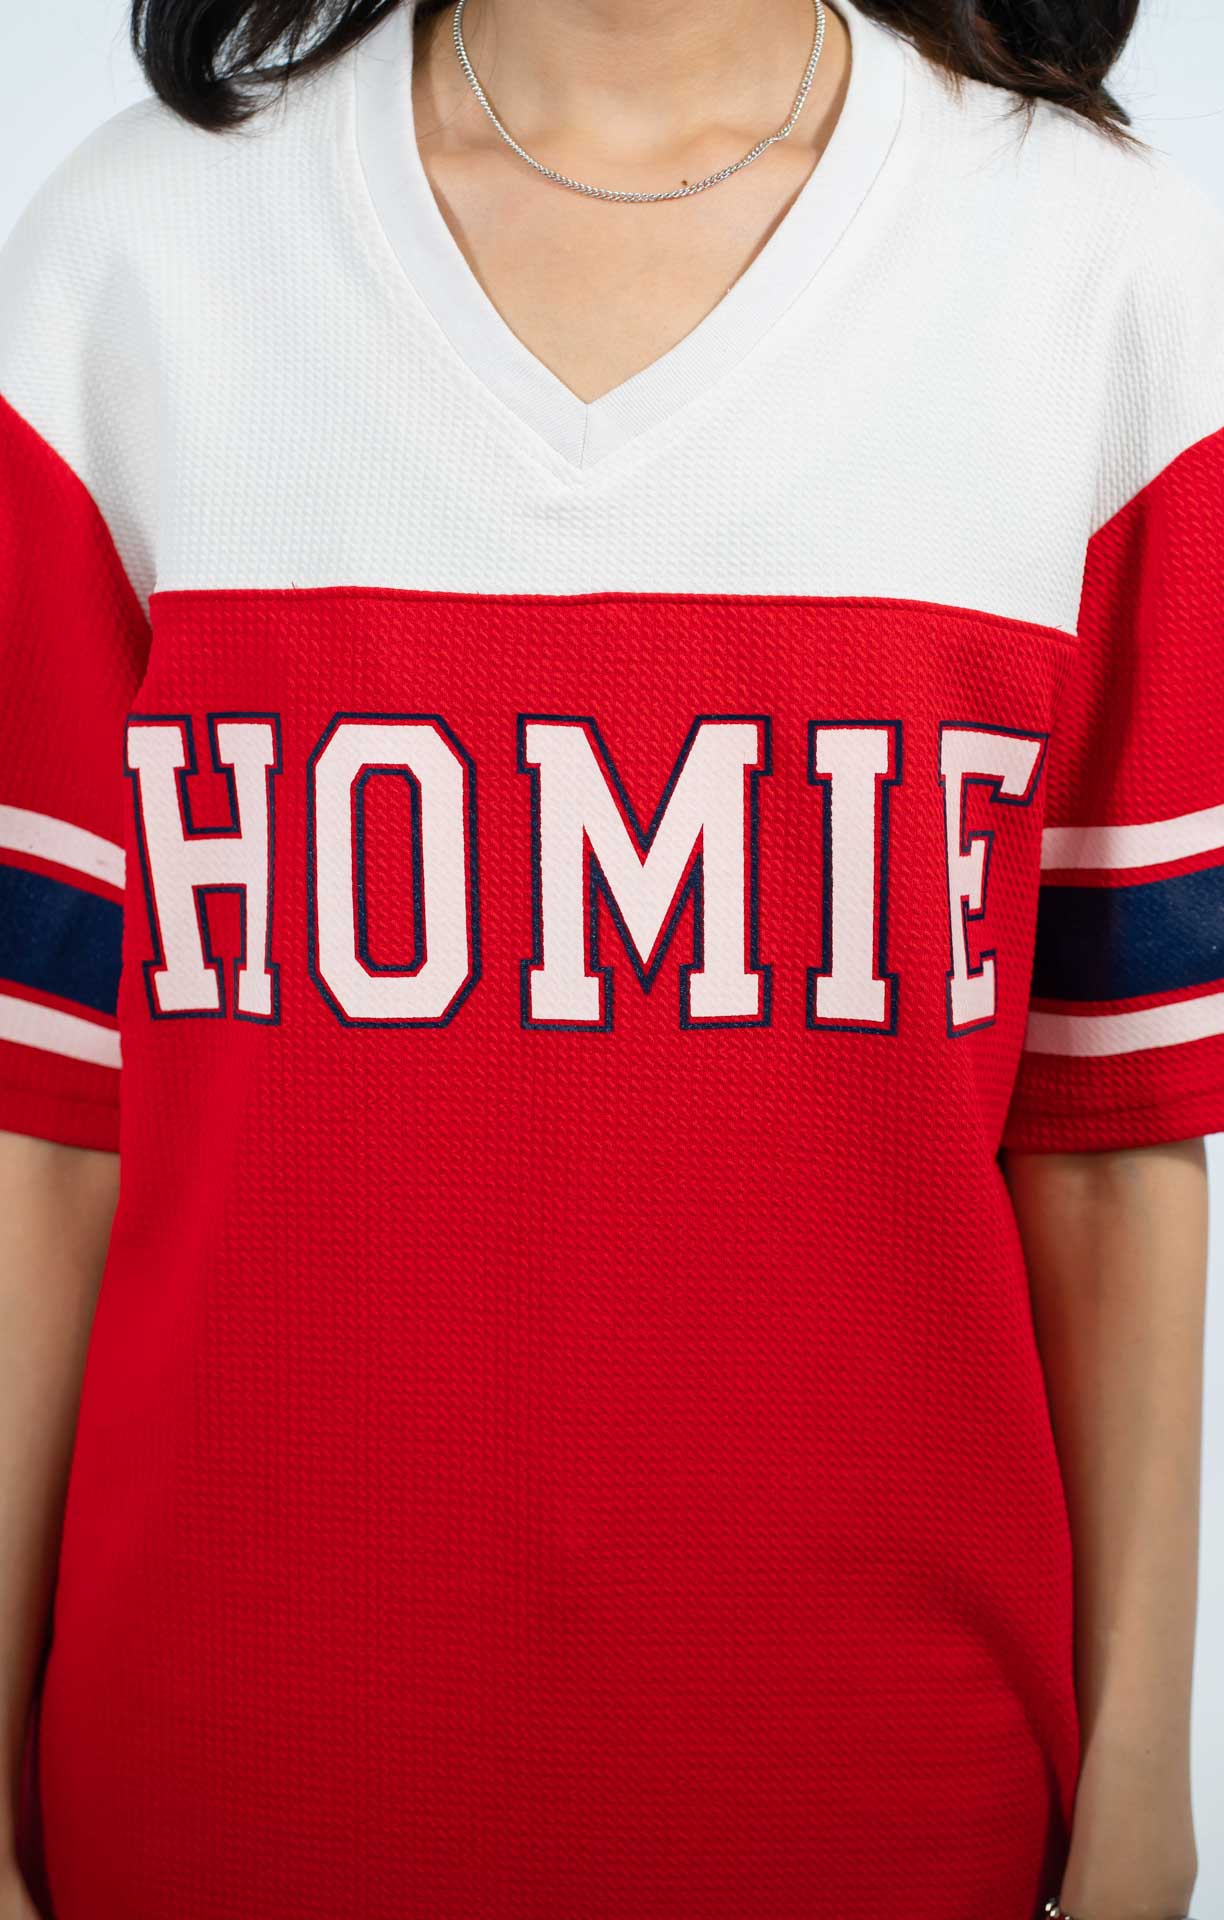 HOMIE Oversized Red Jersey Tshirt